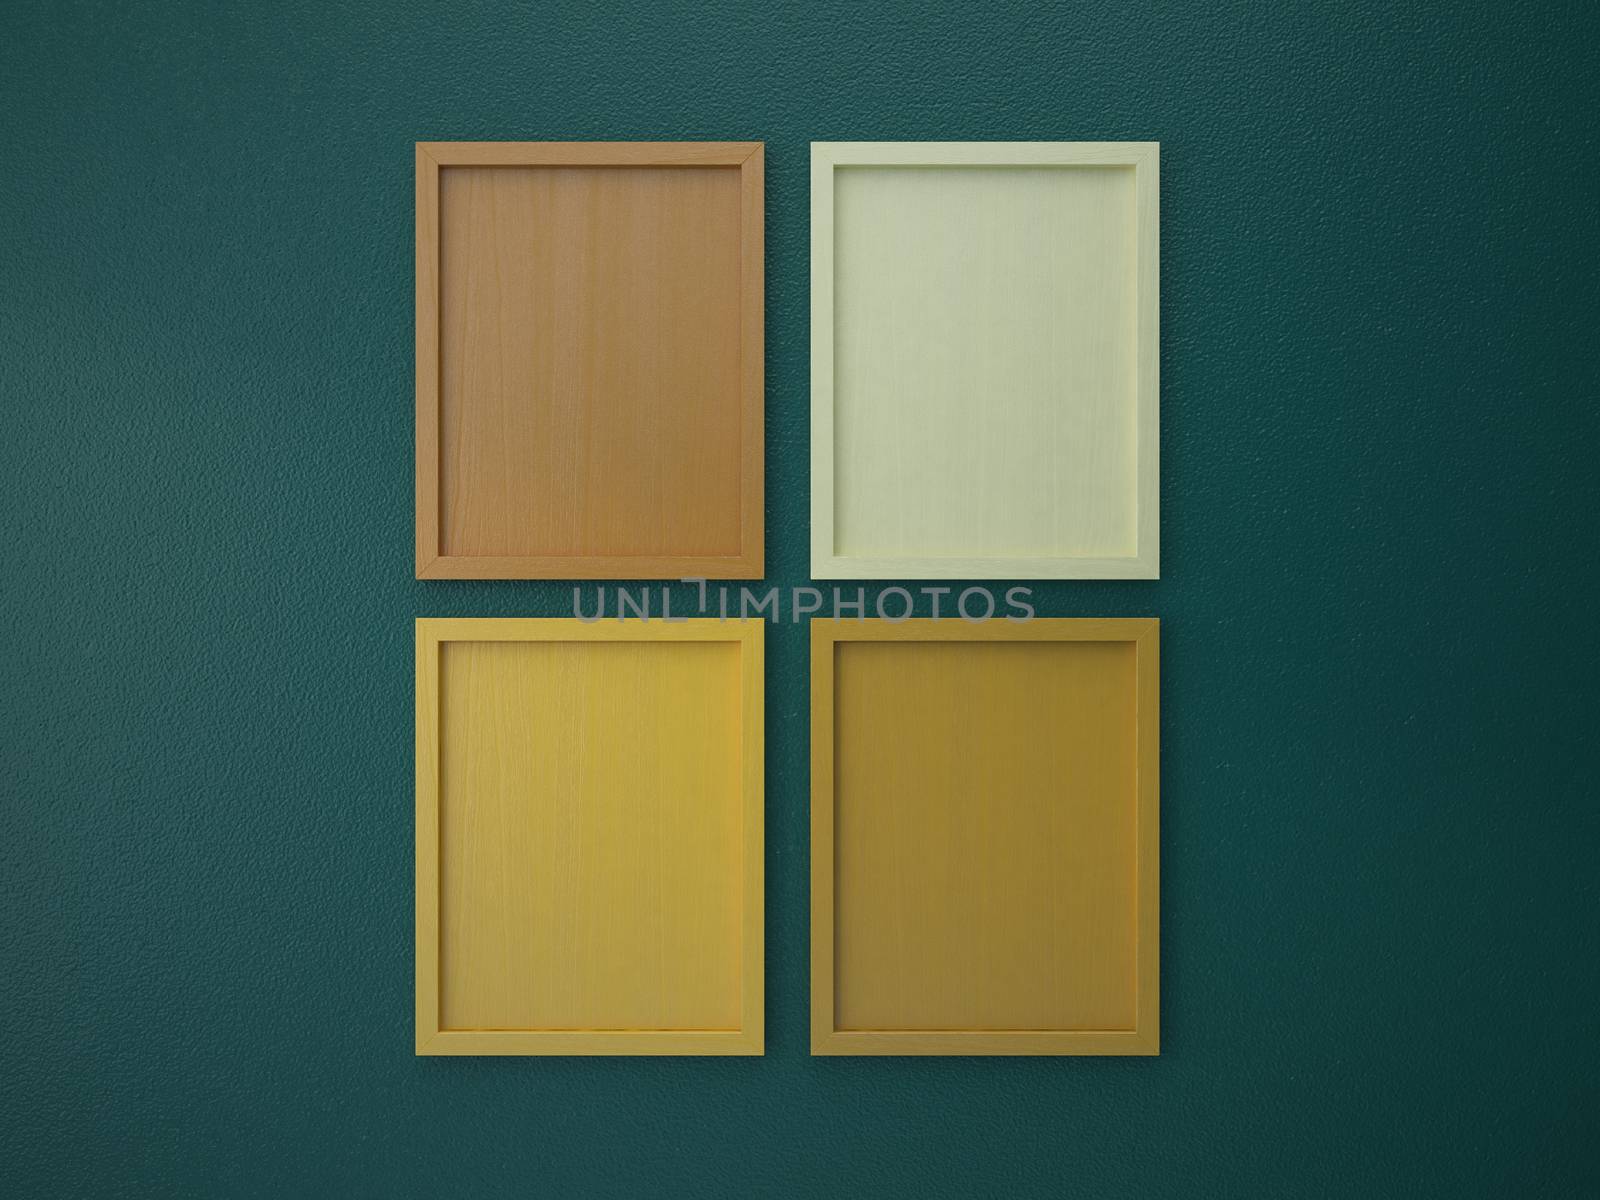 blank frame on interior wall green and orange tone color